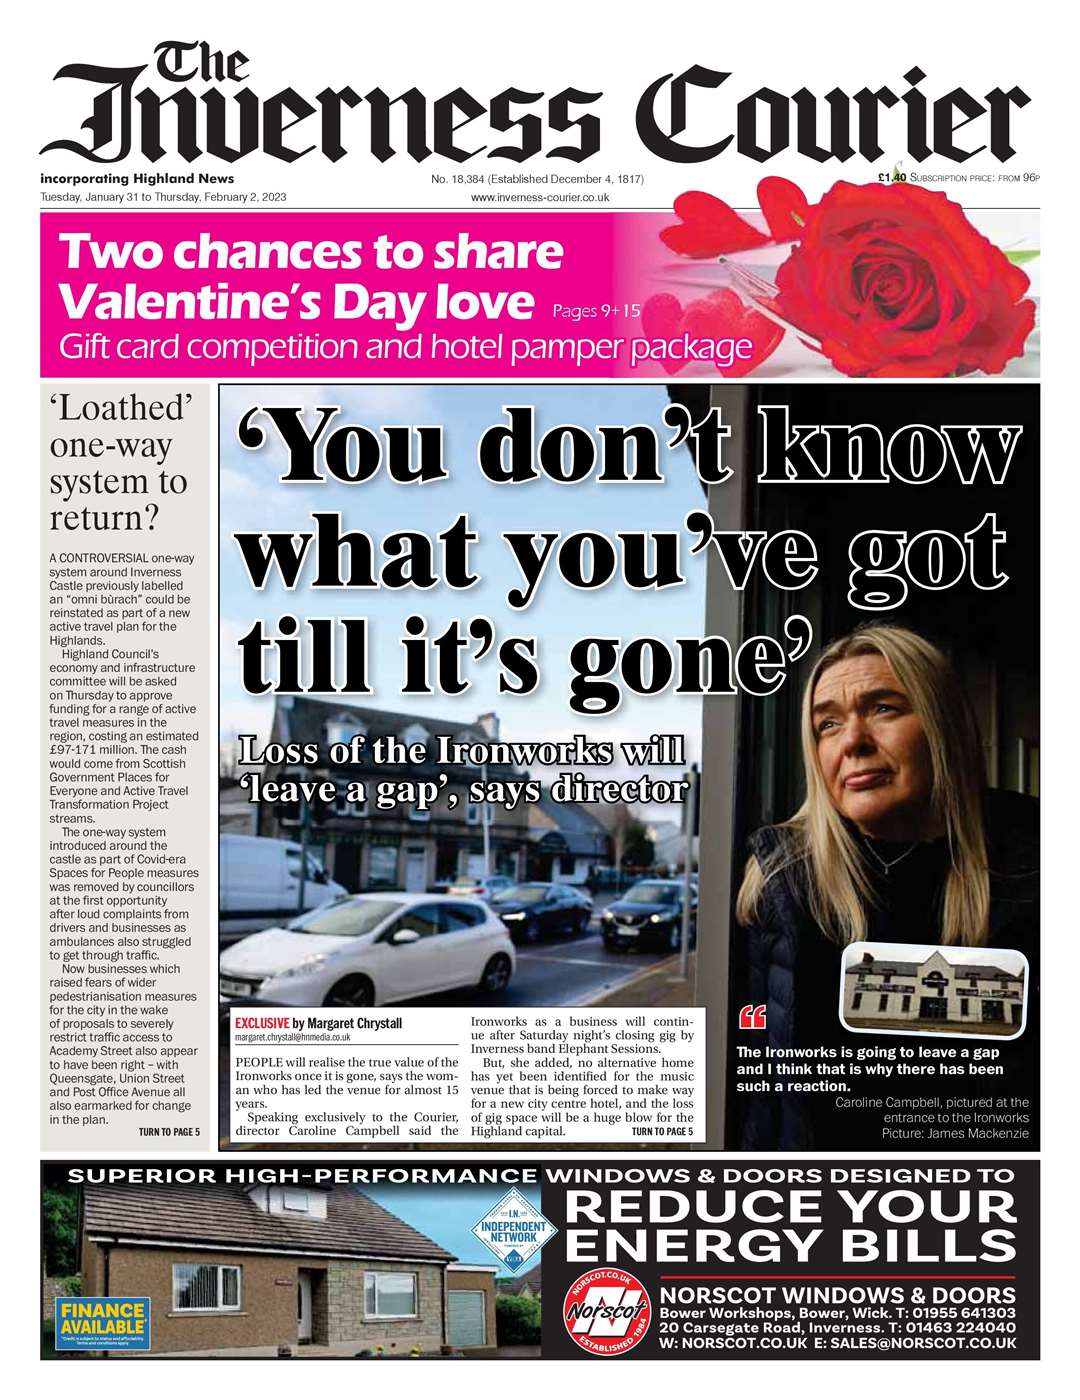 The Inverness Courier, January 31, front page.